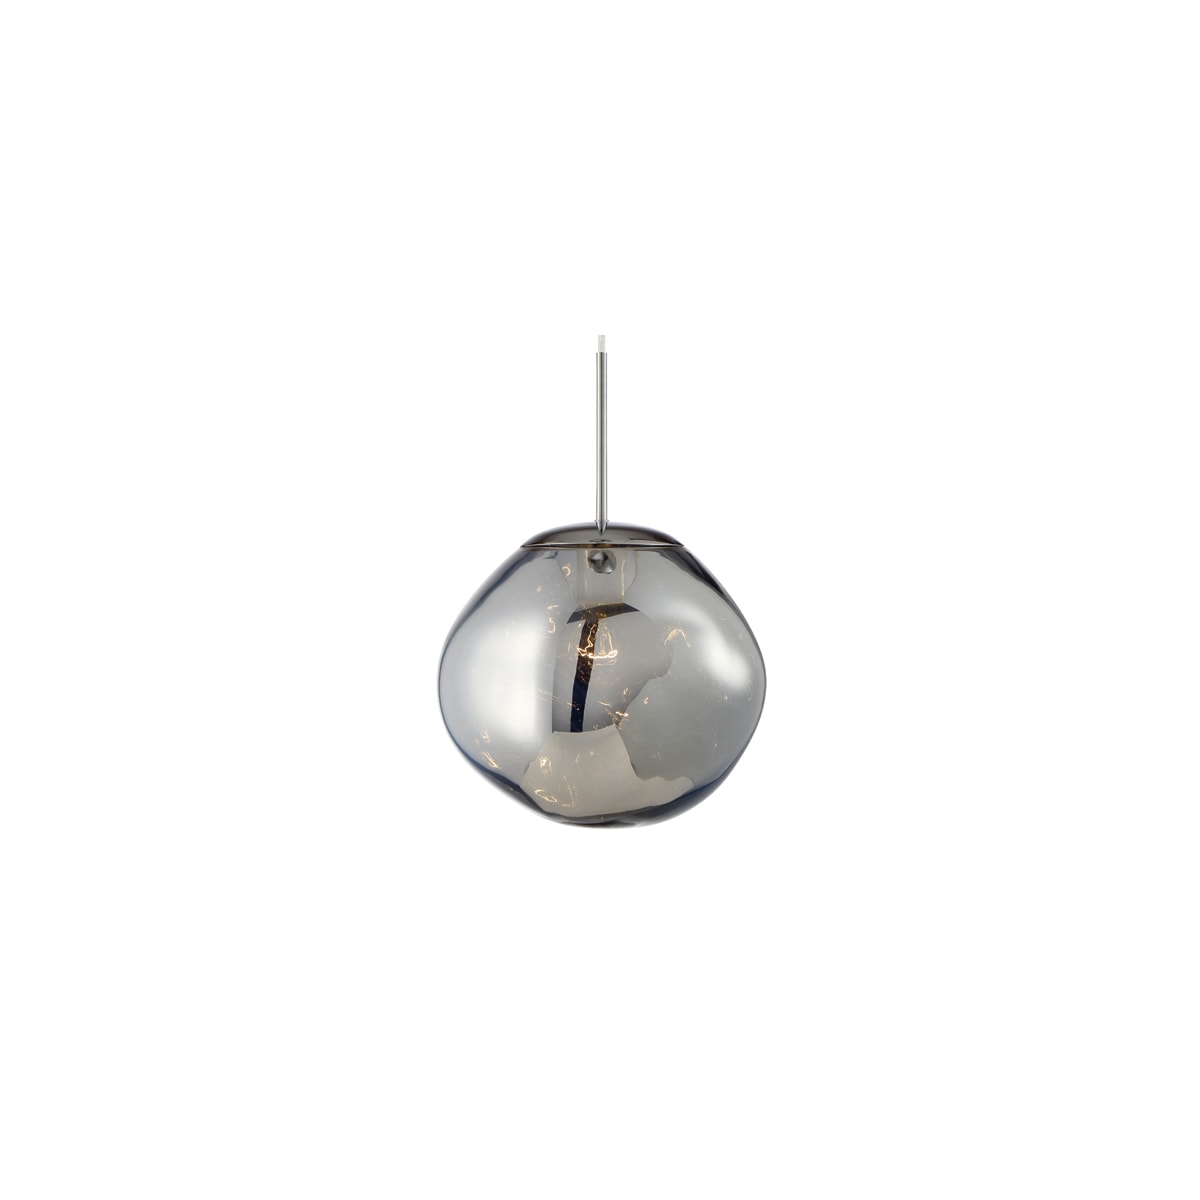 Eurofase Bankwell Pearlized Orb Light Pendant in Copper - 34287